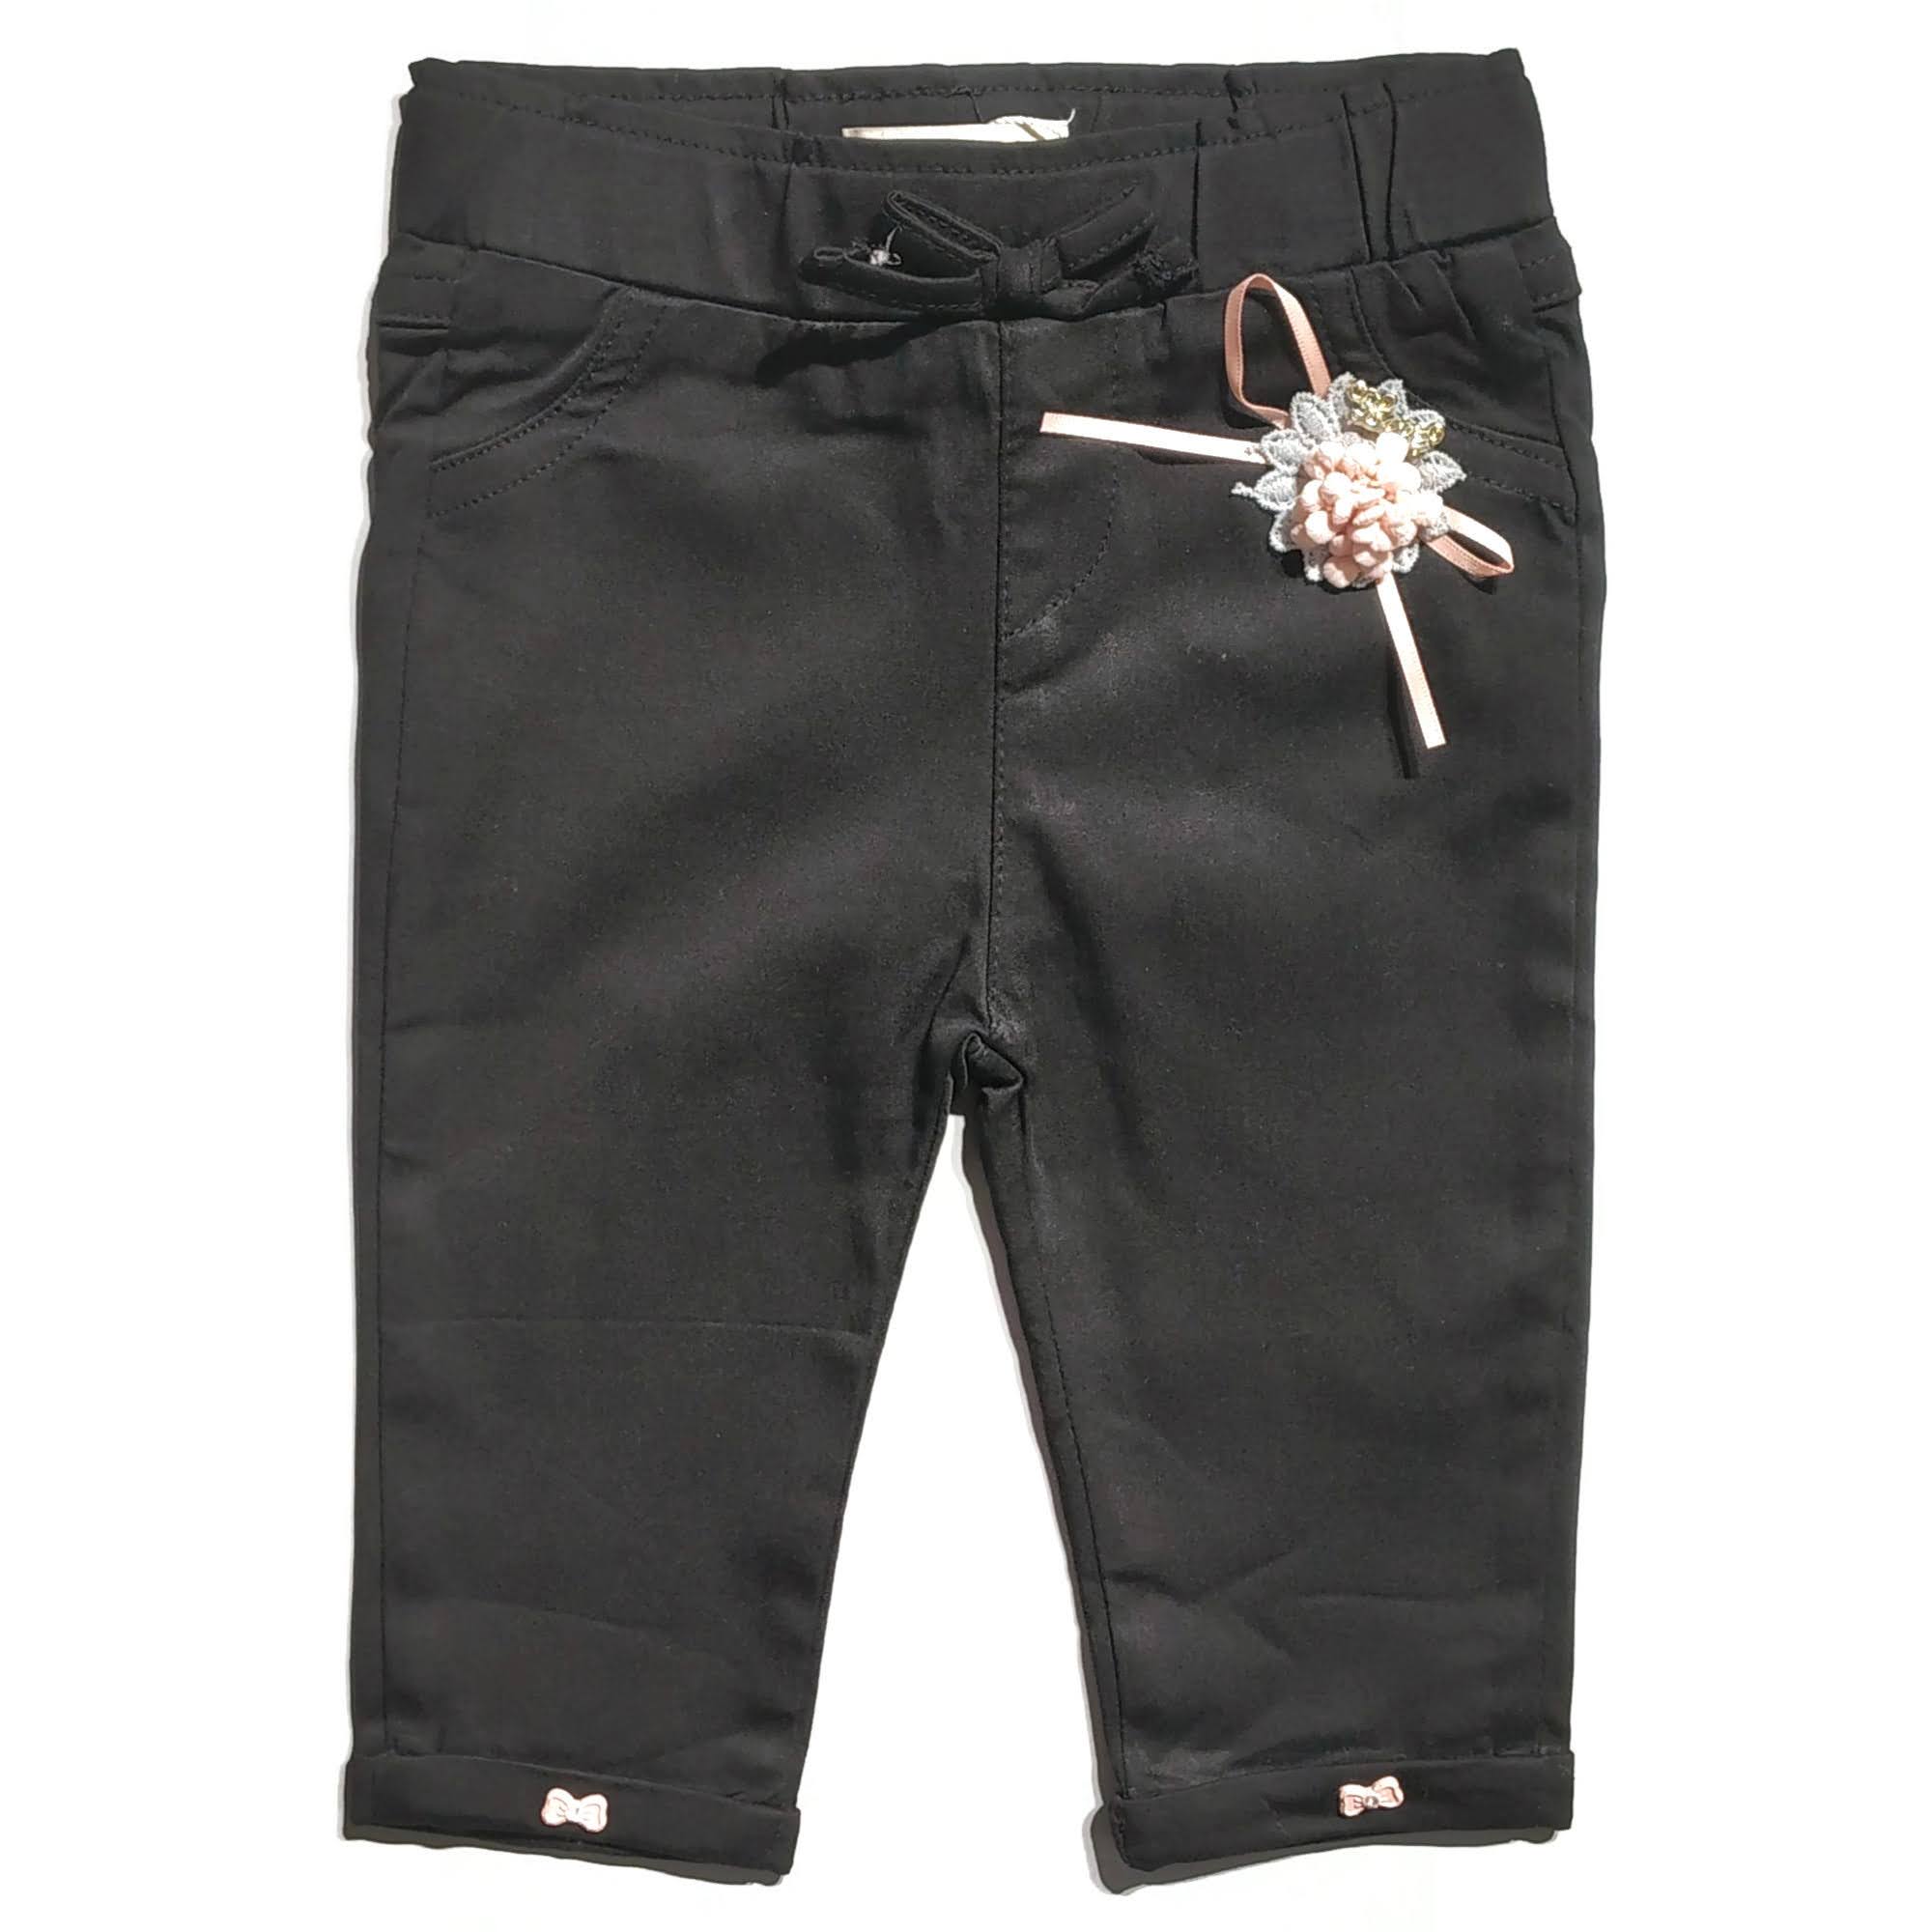 Buy Black Four Pocket Cargo Pants Pure Cotton for Best Price, Reviews, Free  Shipping